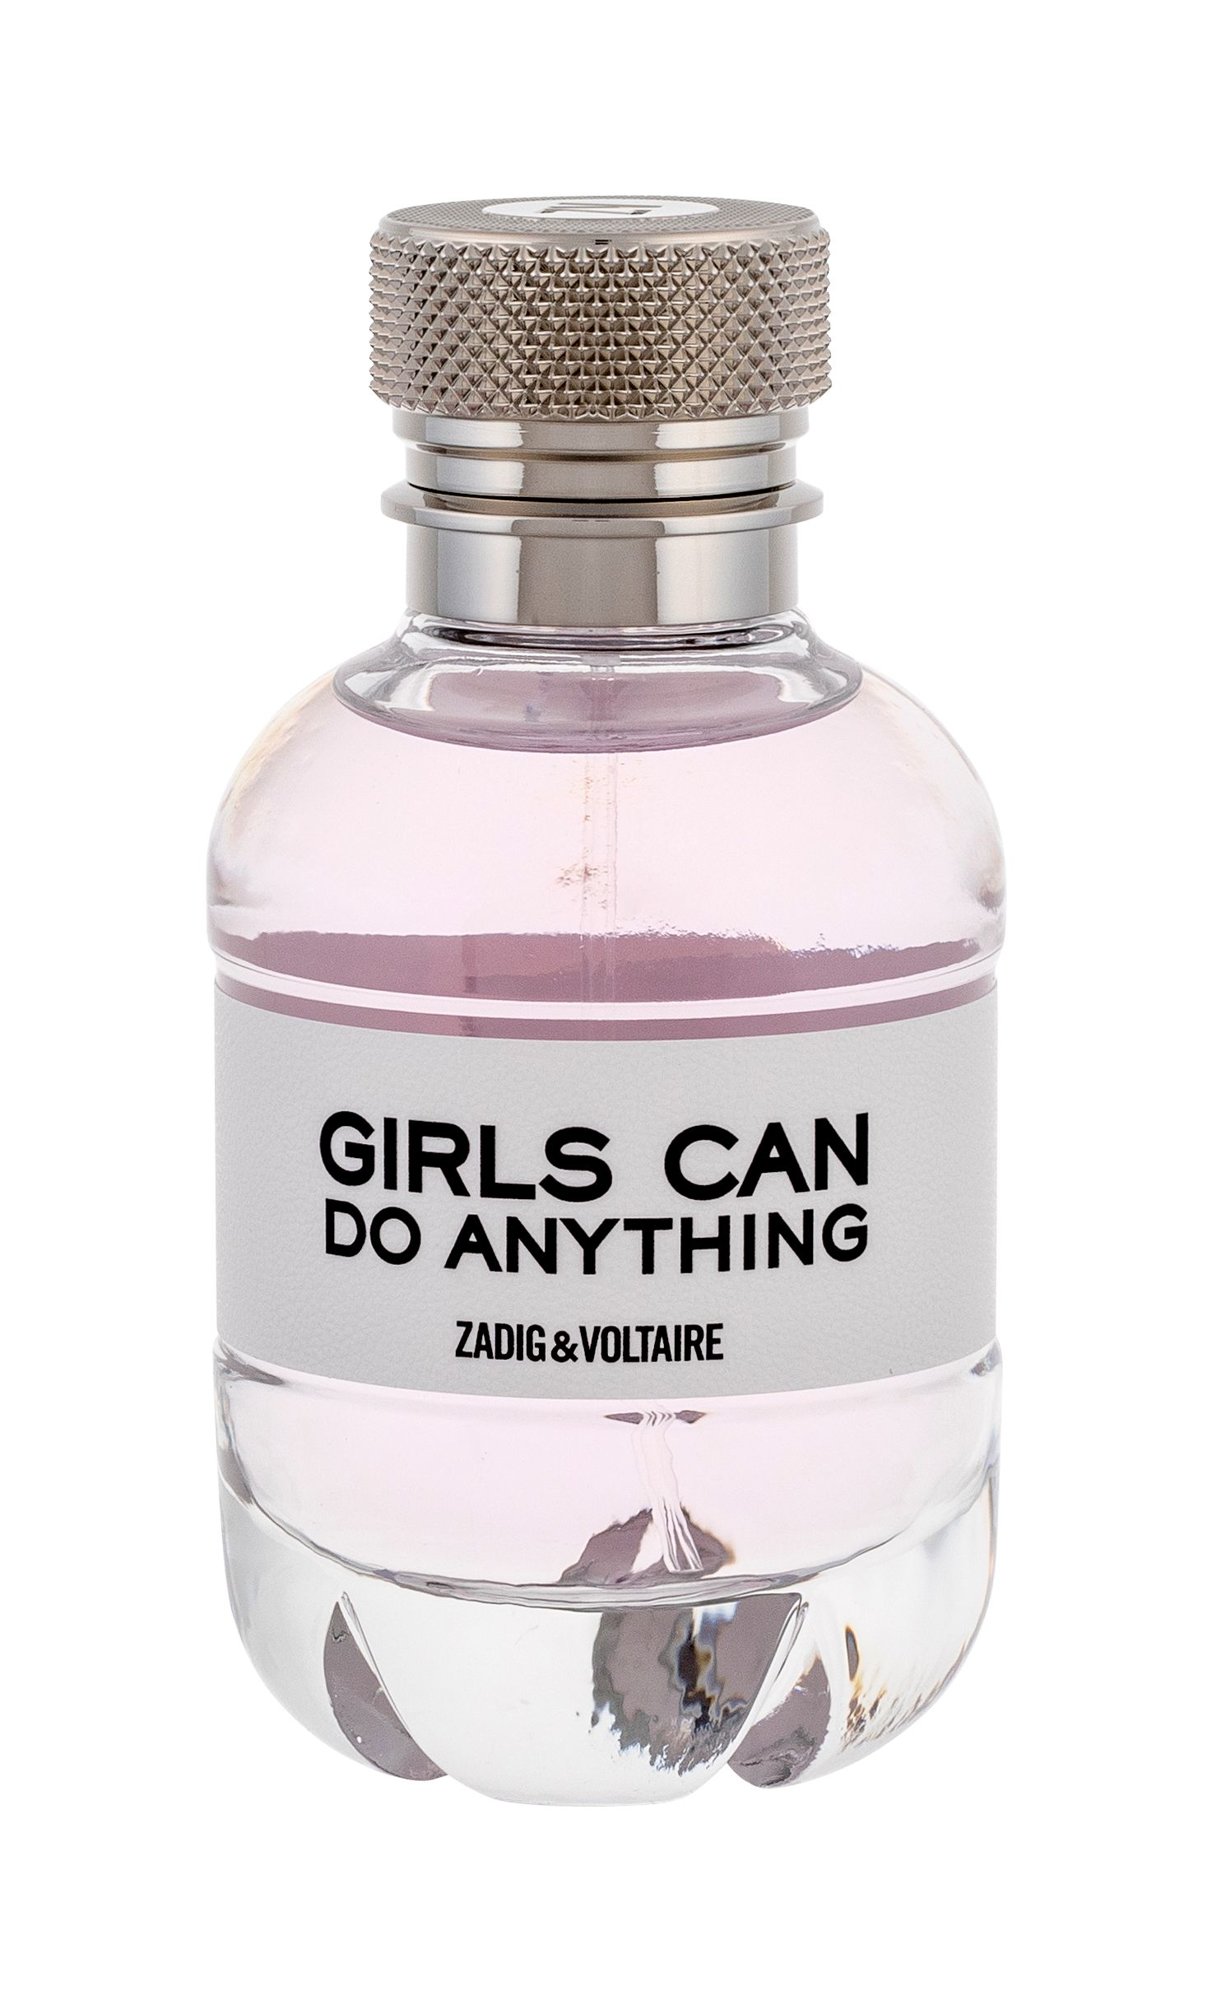 Zadig & Voltaire Girls Can Do Anything, edp 50ml